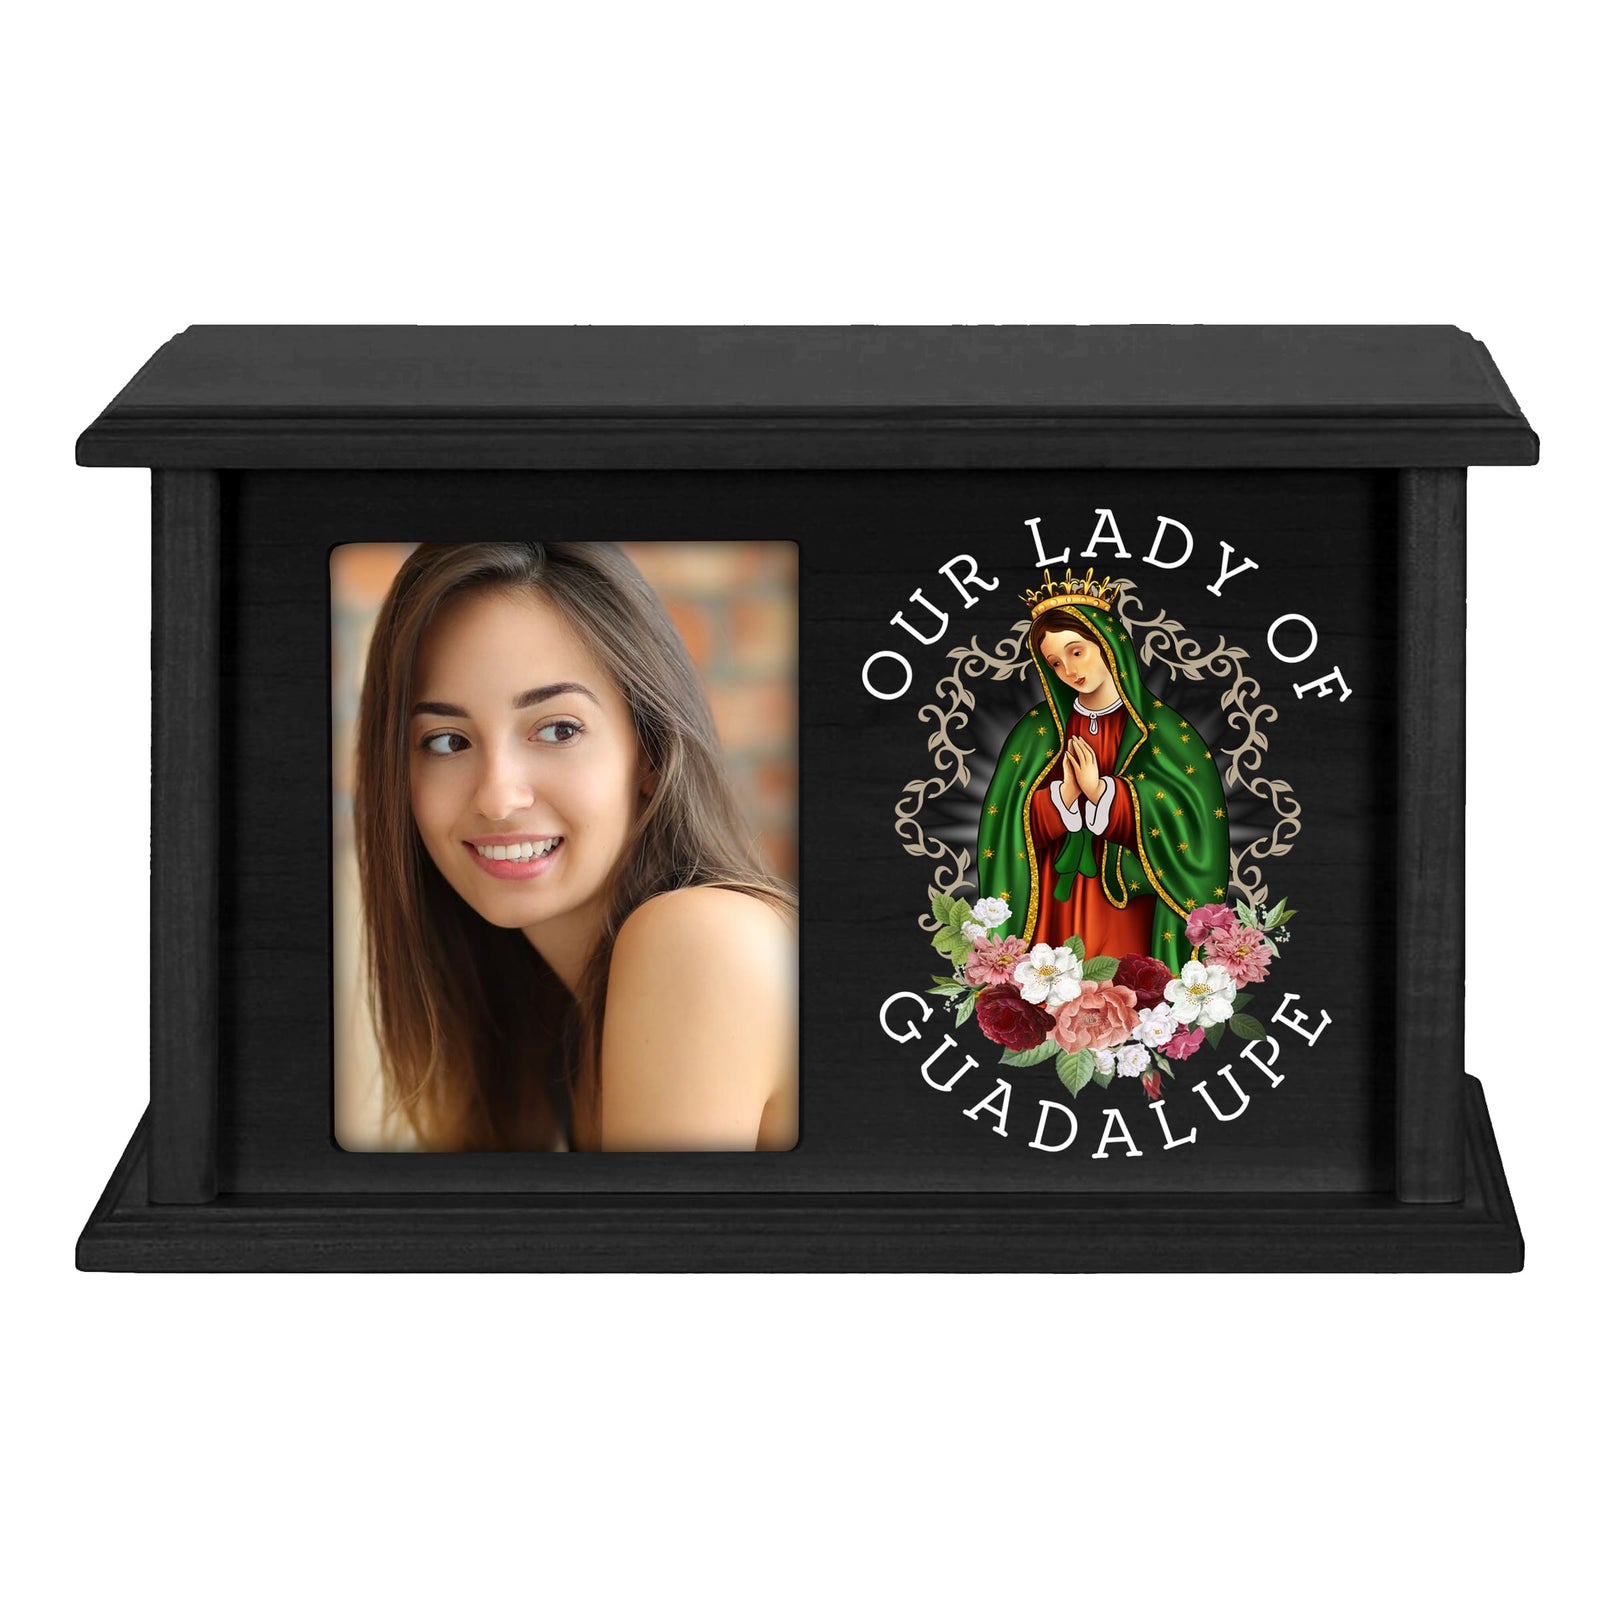 Virgin Lady of Guadalupe Memorial Cremation Horizontal Urn For Adult Human Ashes In Spanish